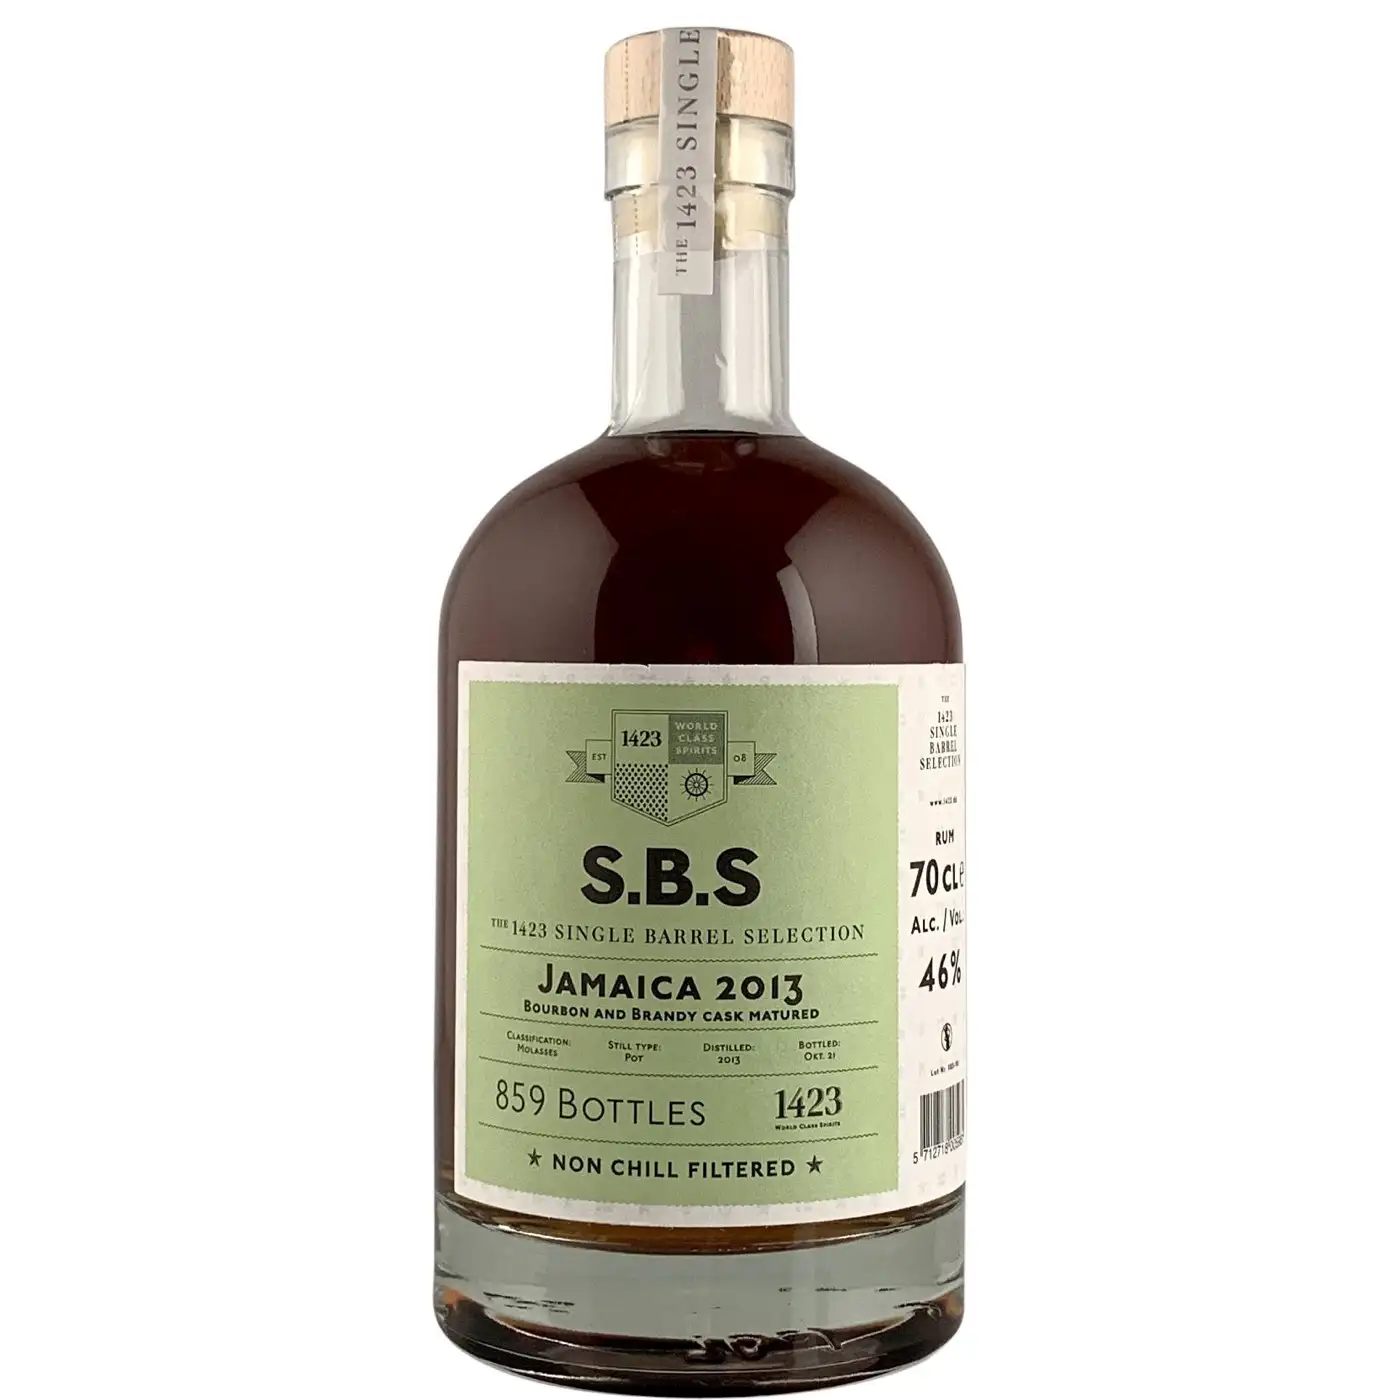 Image of the front of the bottle of the rum S.B.S Jamaica 2014 Bourbon and Brandy Matured